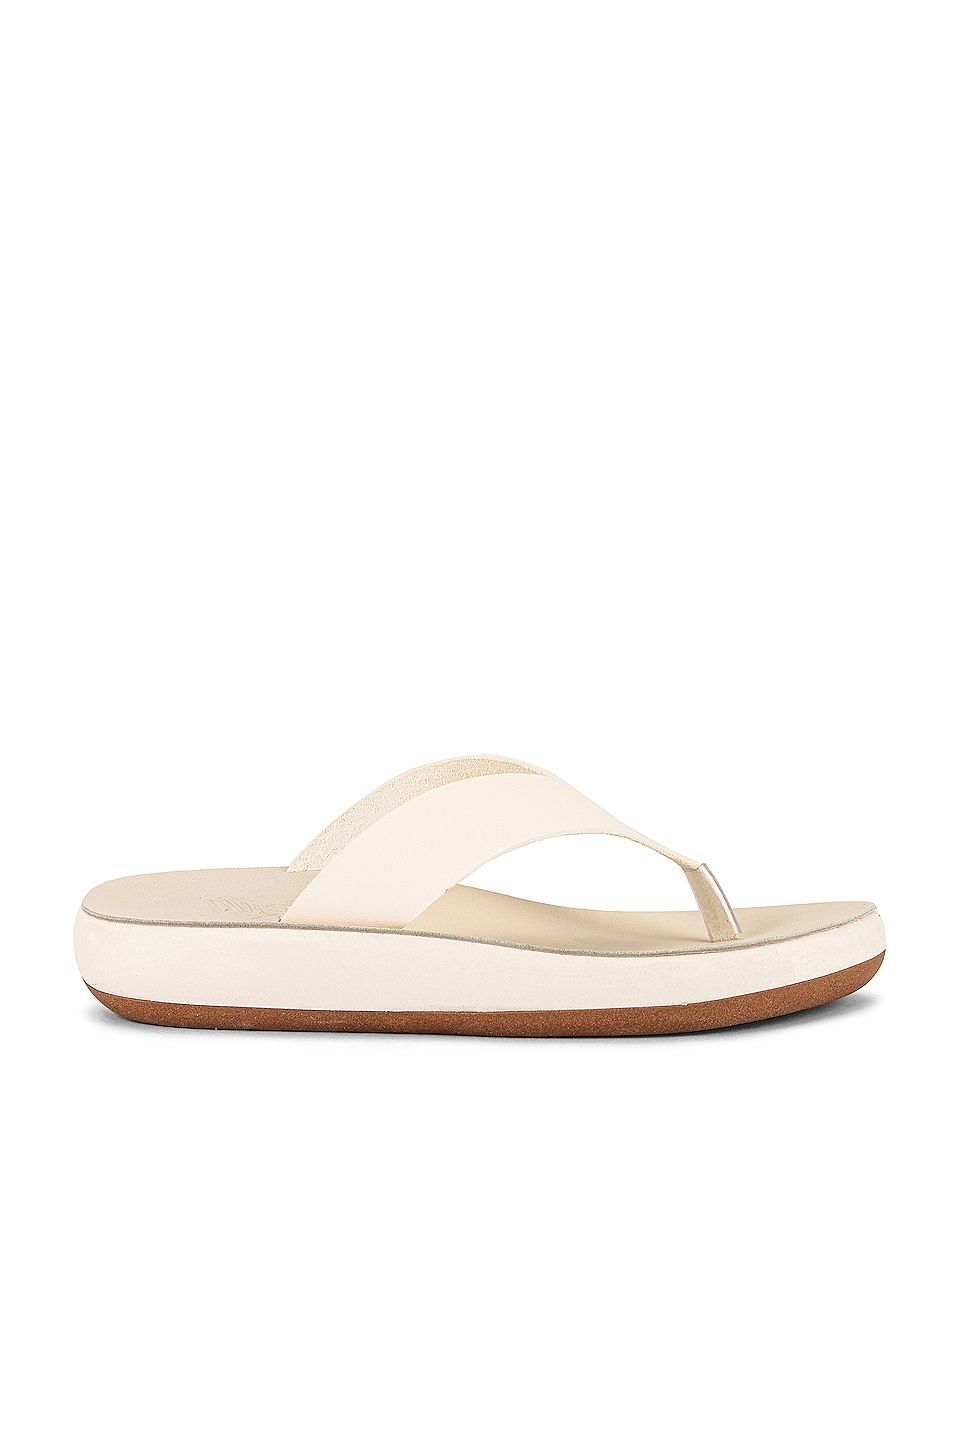 These Are the 25 Most Comfortable Sandals | Who What Wear